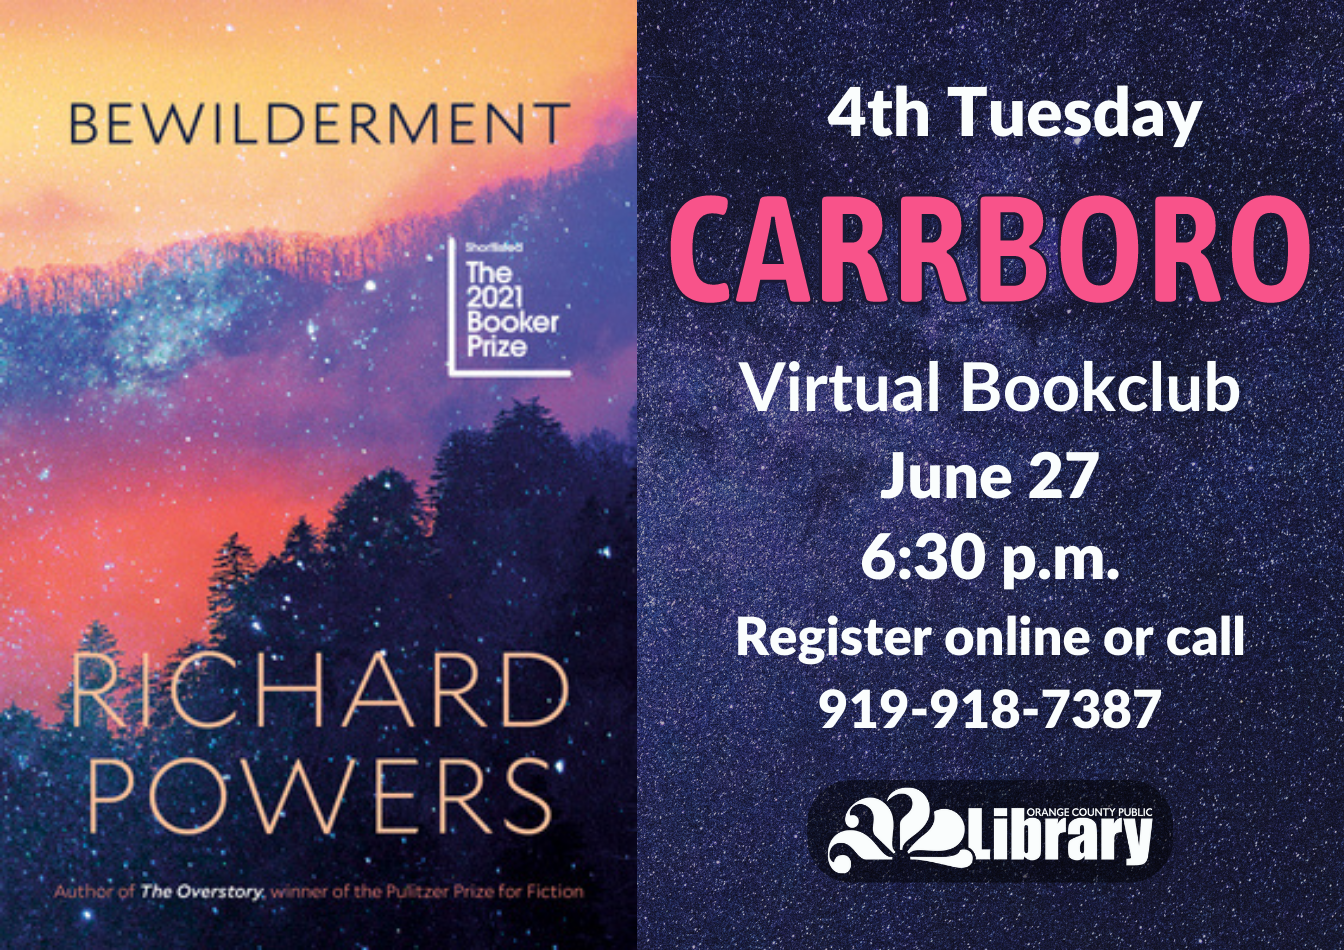 A dark blue flyer with the cover of this month's book, Bewilderment by Richard Powers. The cover features a mountainside silhouetted against a starry, colorful sky. Text: Fourth Tuesday Carrboro Book Club. June 27, 6:30 PM. Register online or call 919-918-7387.